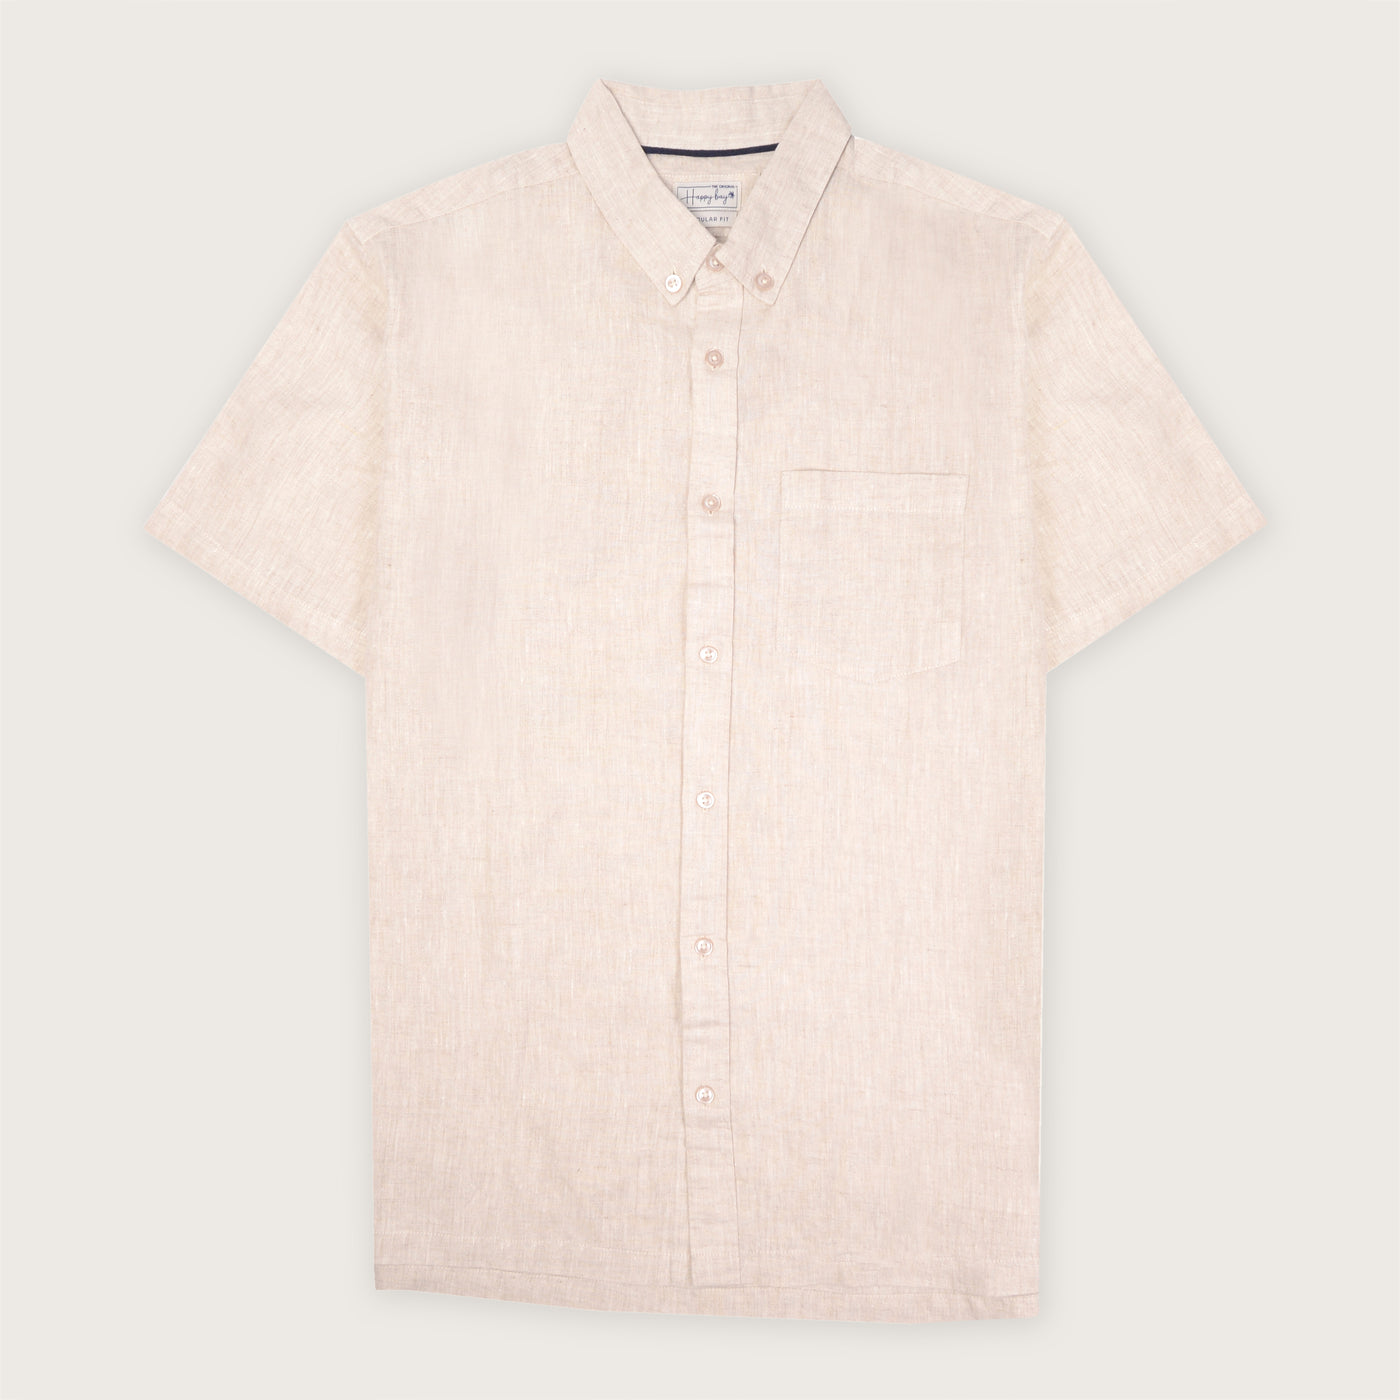 Buy now pure linen pure linen life is rosy shirt